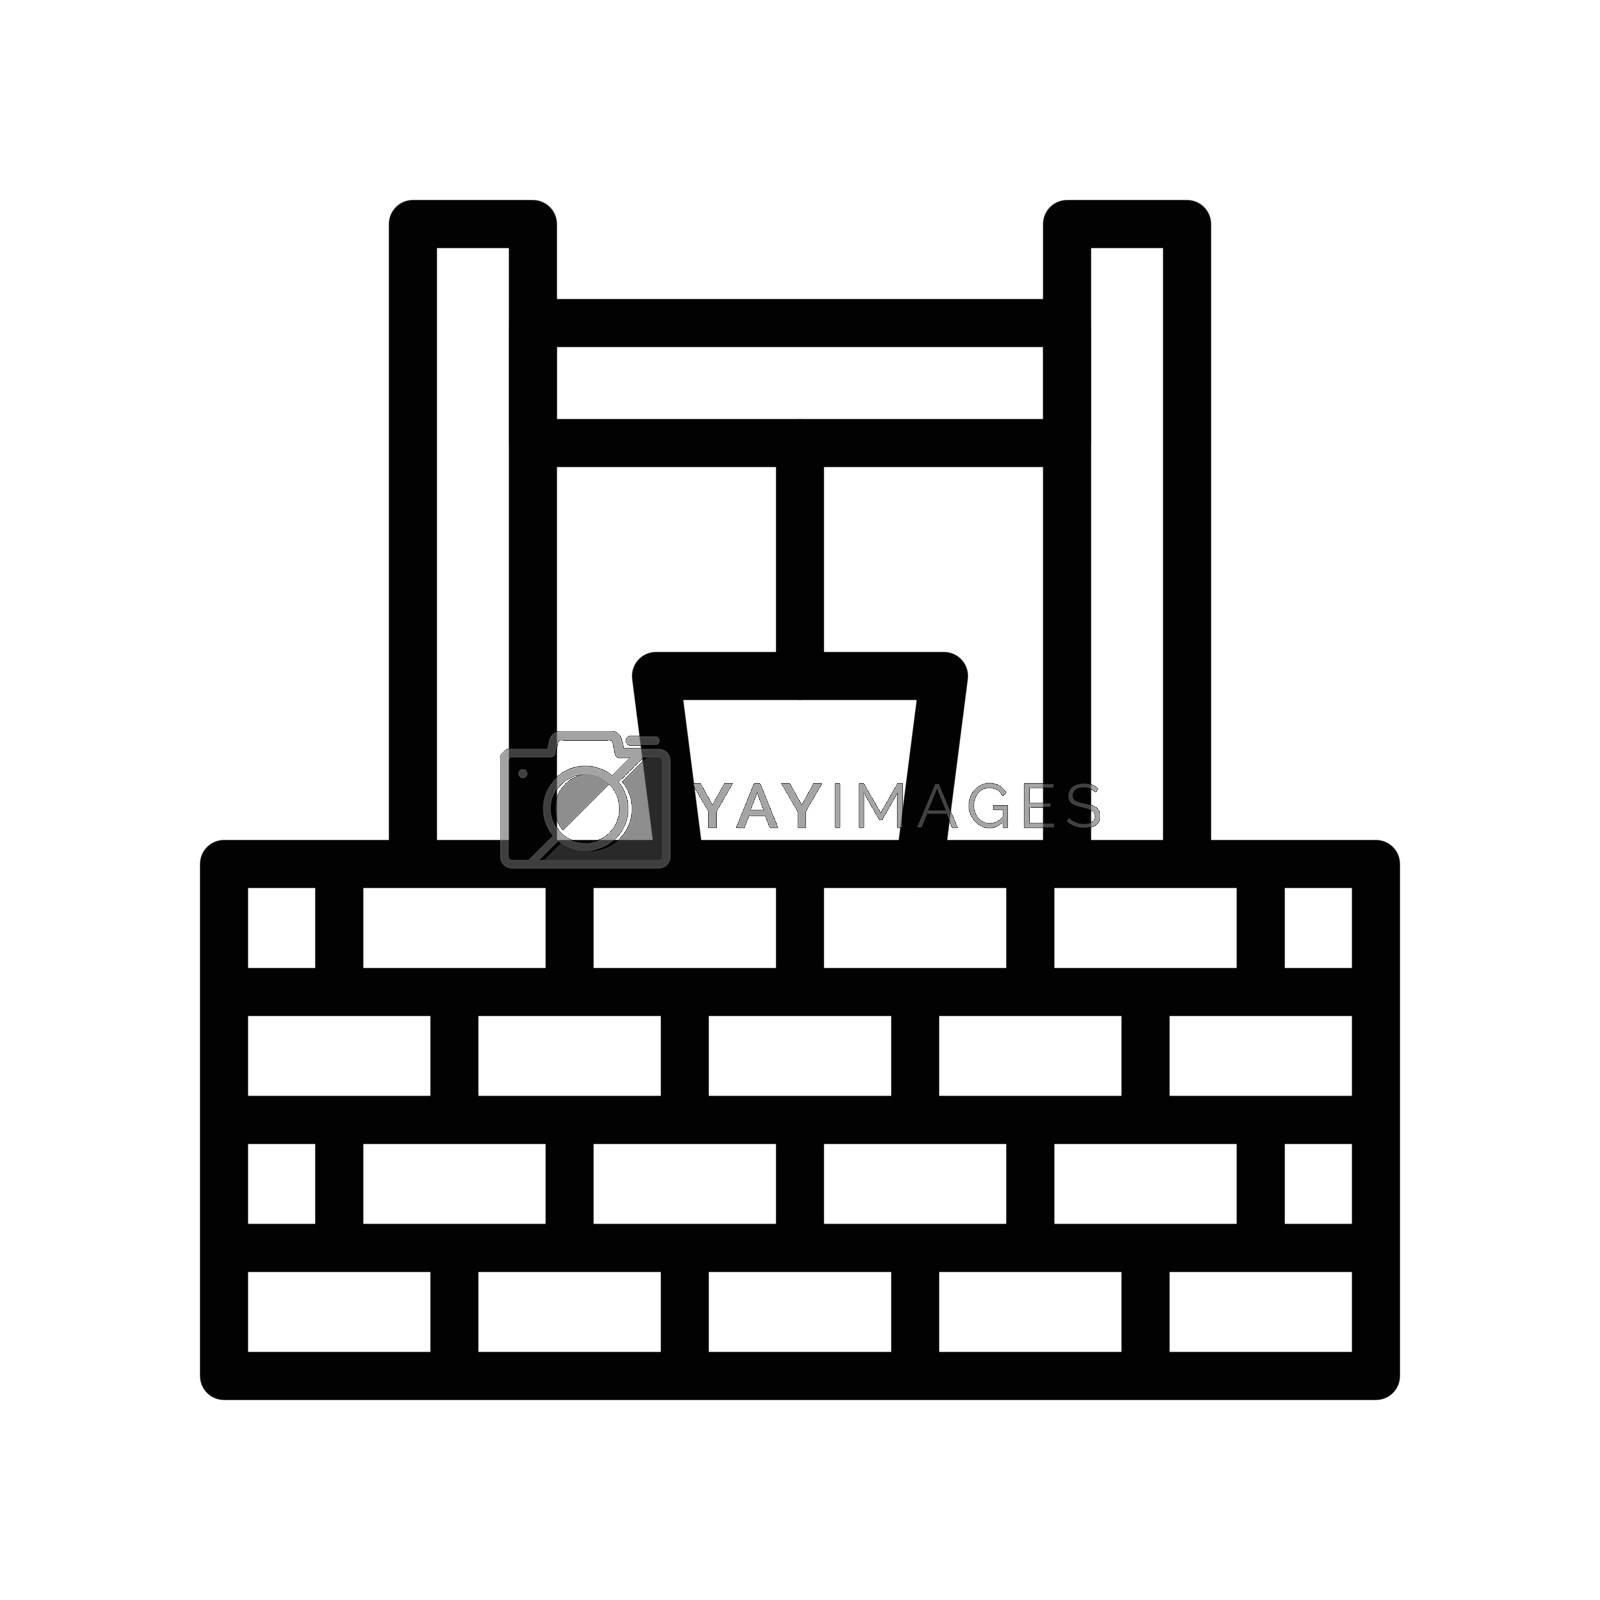 Royalty free image of bucket by vectorstall